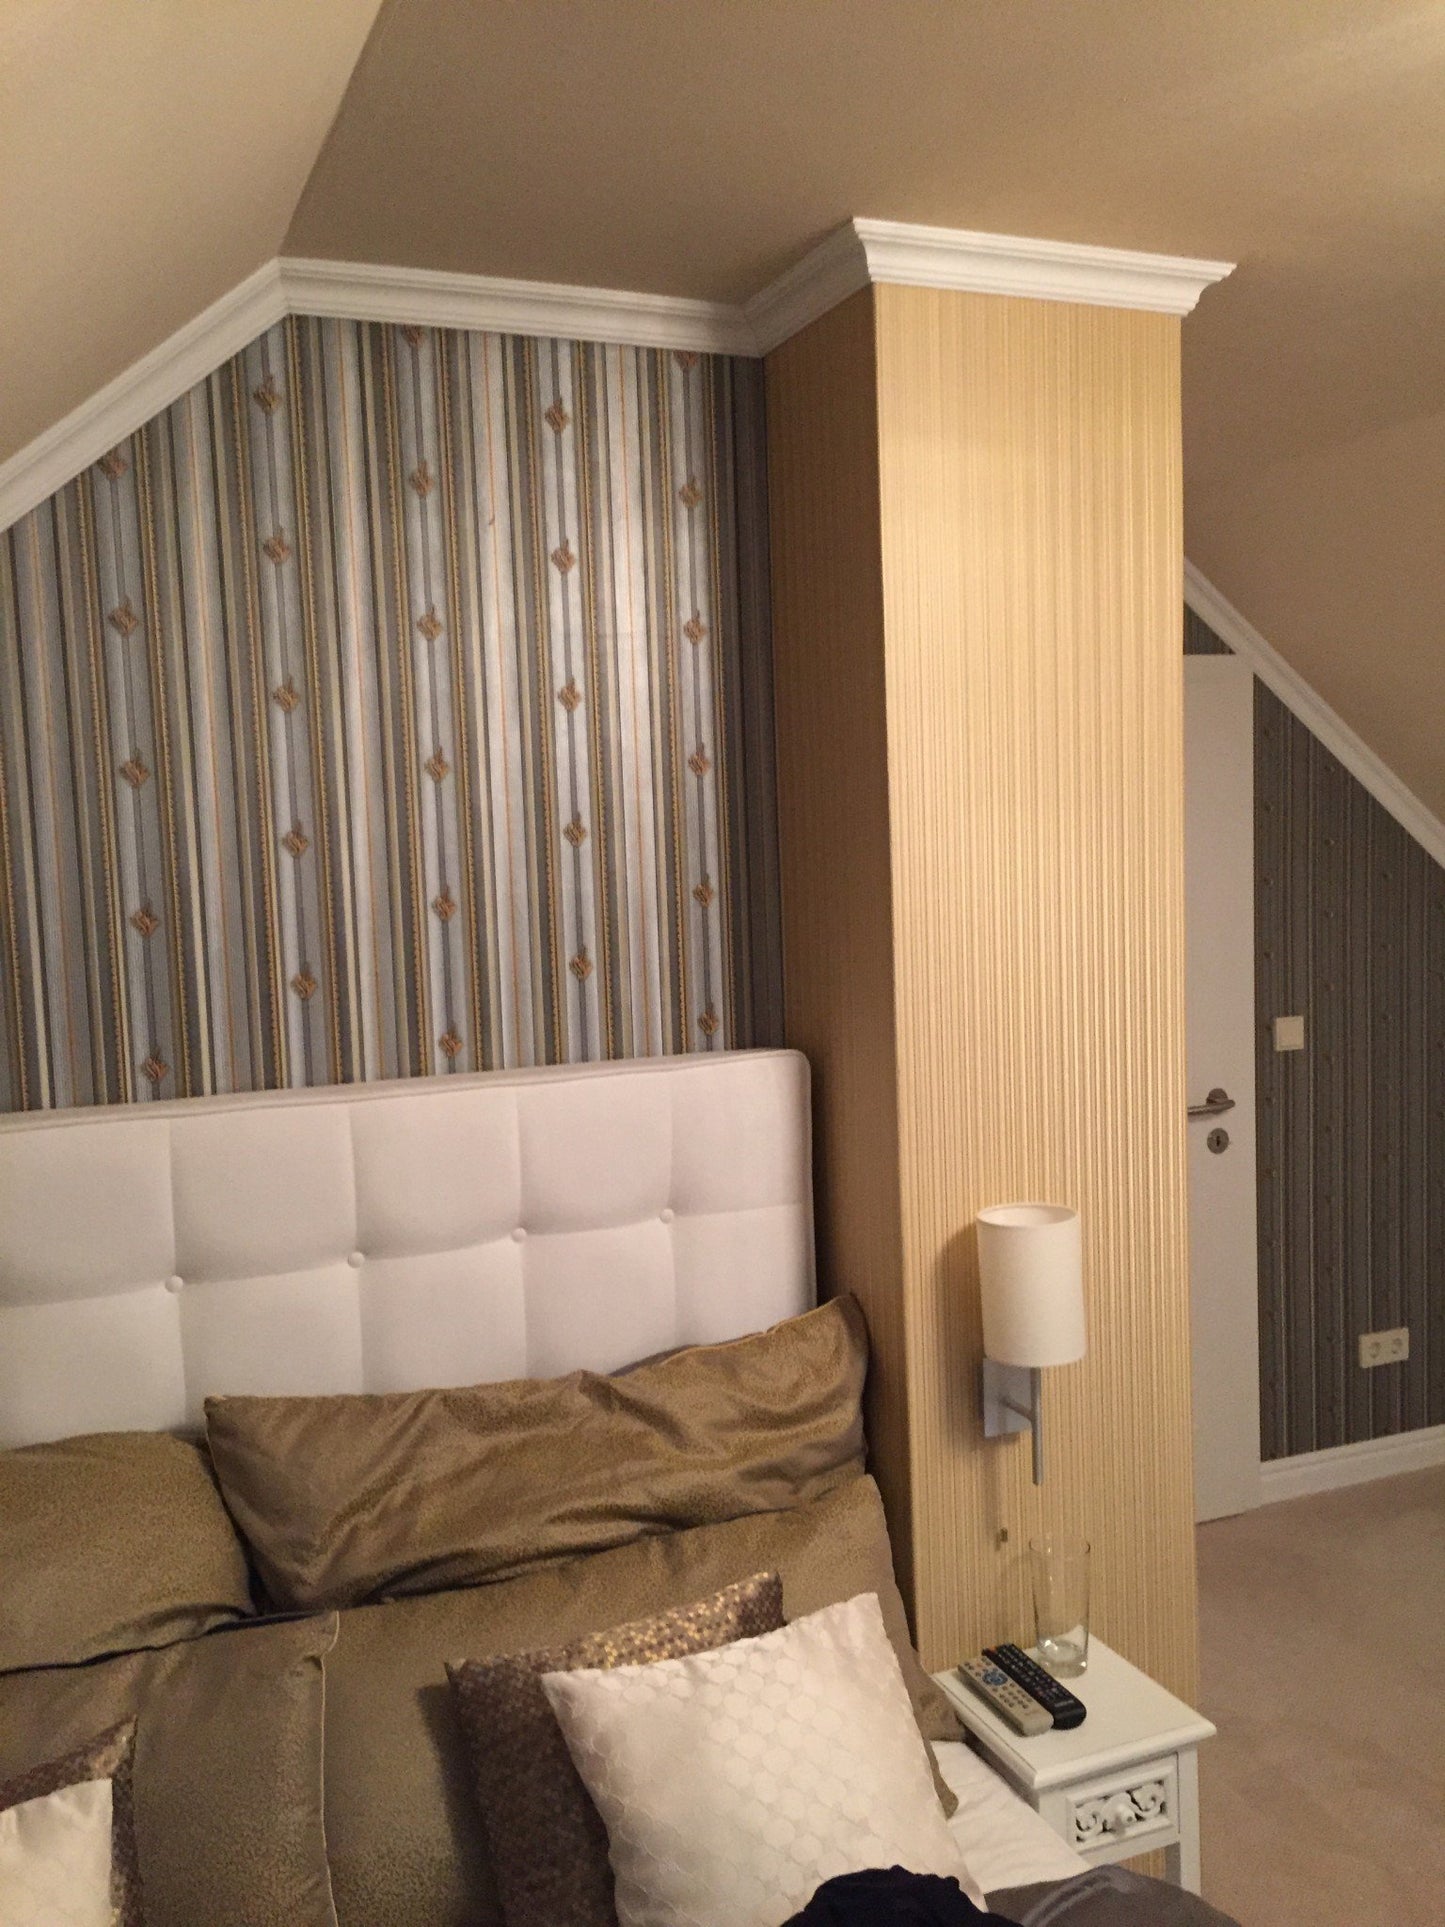 Orlando - Modern Coving in a bedroom